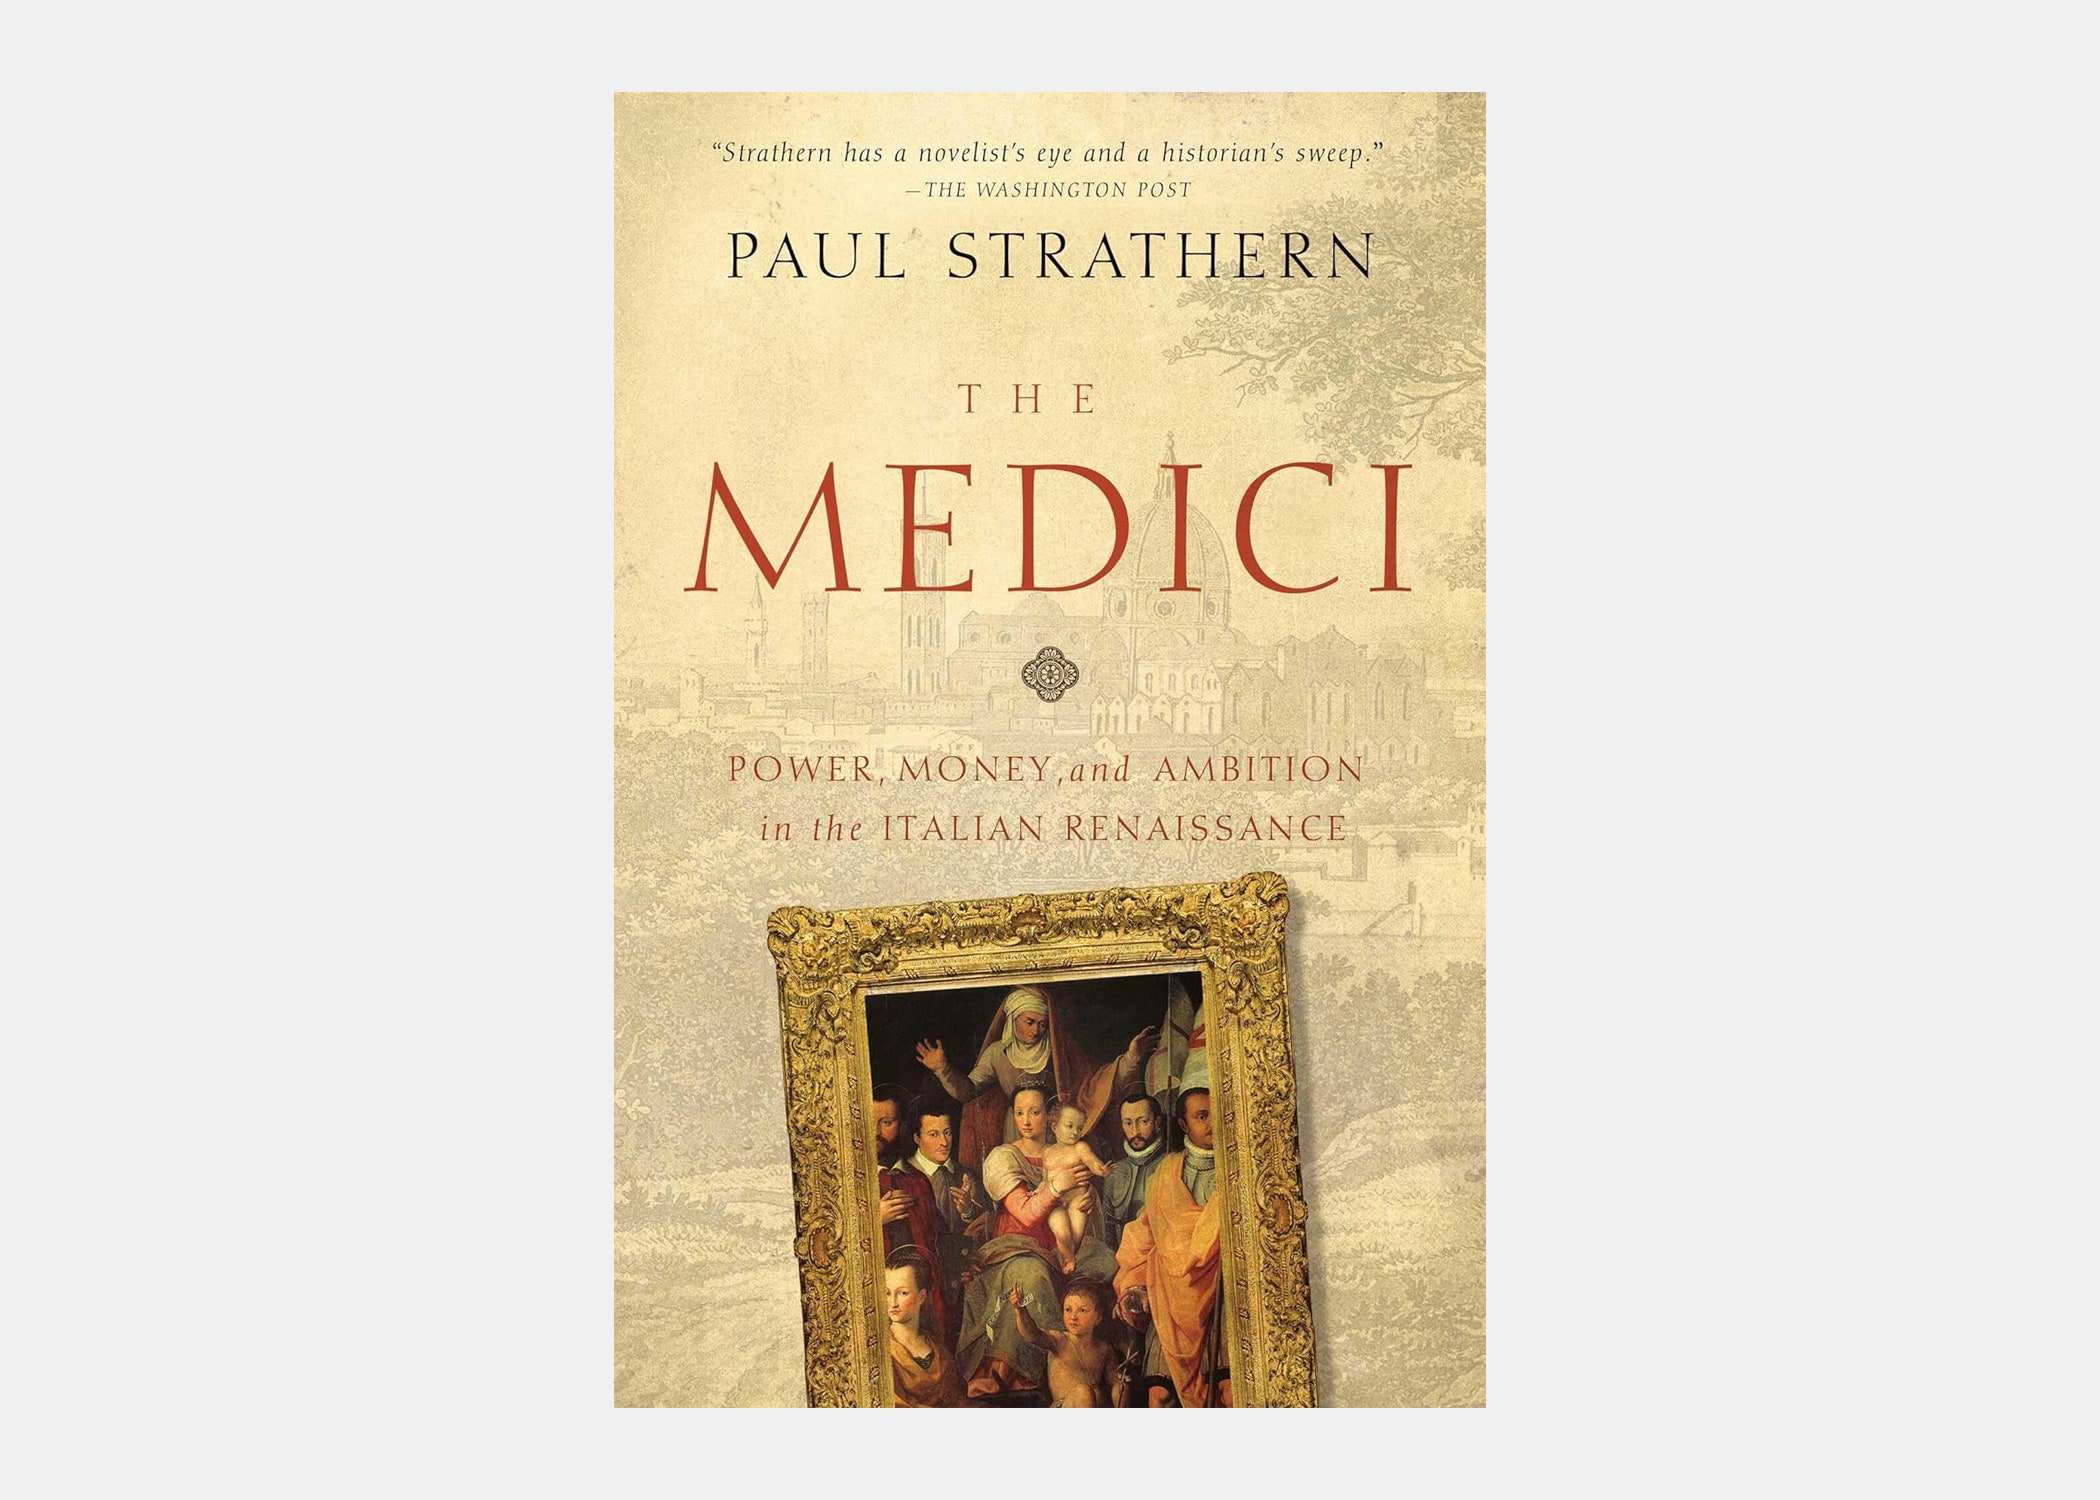 <p><strong>What it’s about:</strong> For a more factual understanding of the influential family that shaped the Italian Renaissance, you can’t go wrong with this 464-page tome. This evocative and masterful account of the dramatic history of the Medicis also covers their patronage of the day’s greatest minds (Michelangelo, Leonardo da Vinci, and Galileo, among others), offering context and knowledge upon which you can draw during your next visit to Florence and greater Tuscany.</p> <p><strong>The mood it’s giving:</strong> The thrill and shock of <em>Succession</em>, but Florentine and, you know, real</p> <p><strong>The book’s first line:</strong> “It is Sunday 26 April 1478 in Florence, and the church bells ring out from the towers above the rooftops of the city. Lorenzo the Magnificent, accompanied by his circle of favourites, is making his way through the colorful crowds towards the cathedral of Santa Maria del Fiore.”</p> $16, Amazon. <a href="https://www.amazon.com/Medici-Power-Ambition-Italian-Renaissance/dp/1681774089/ref=sr_1_1?">Get it now!</a><p>Sign up to receive the latest news, expert tips, and inspiration on all things travel</p><a href="https://www.cntraveler.com/newsletter/the-daily?sourceCode=msnsend">Inspire Me</a>